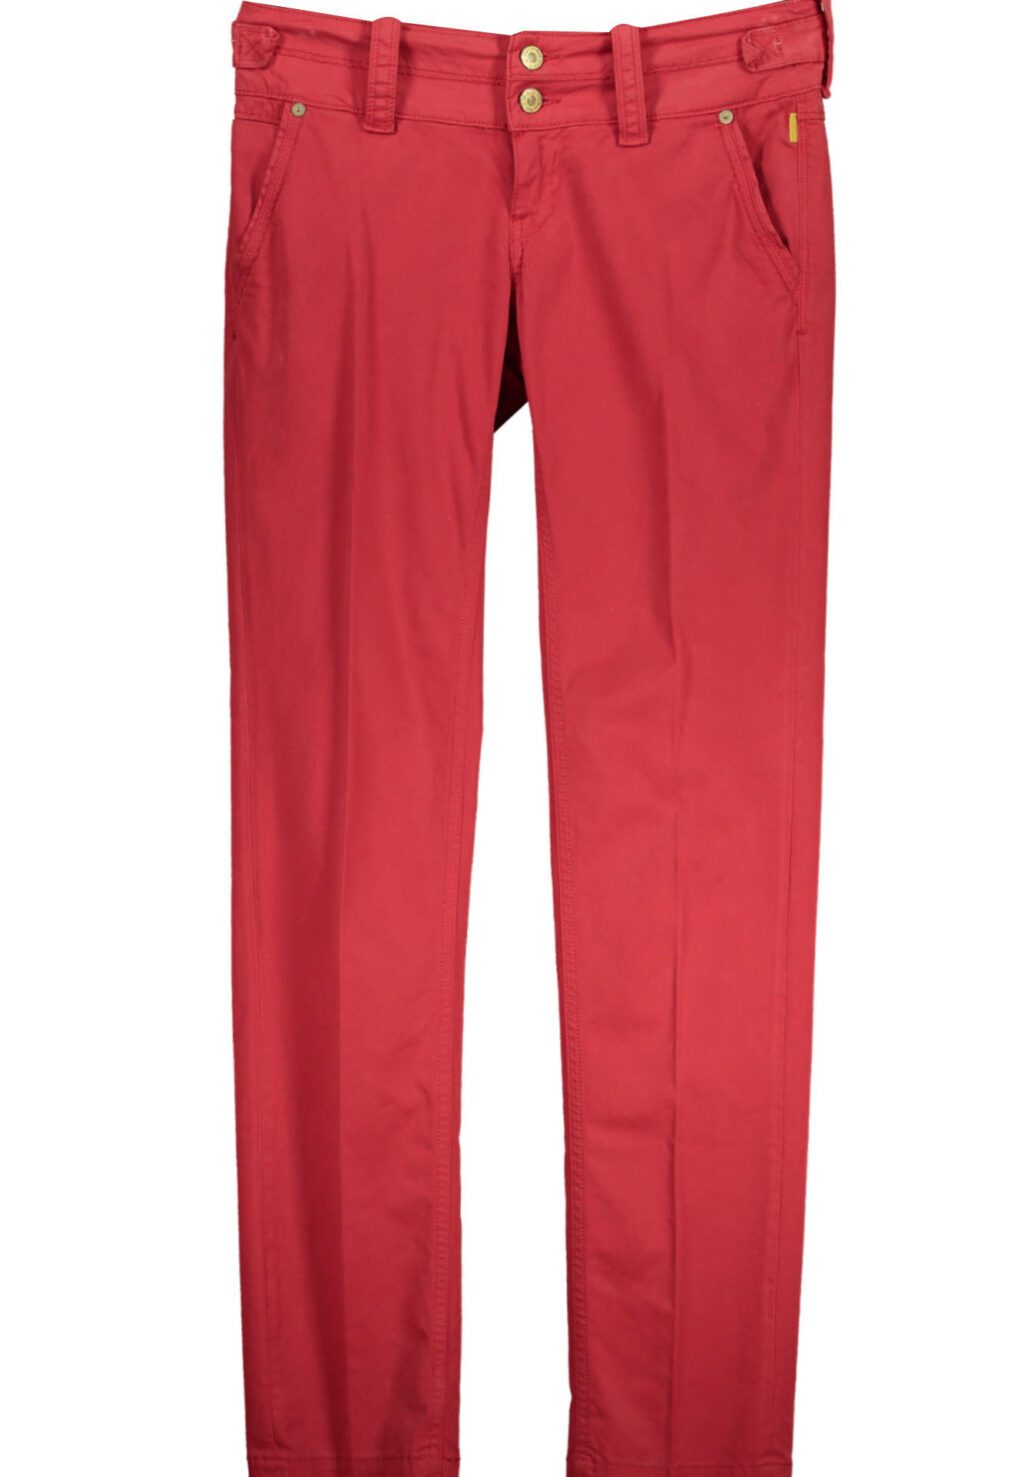 MELTIN'POT RED WOMEN'S TROUSERS S6101-MARYAN_ROSSO_RS25